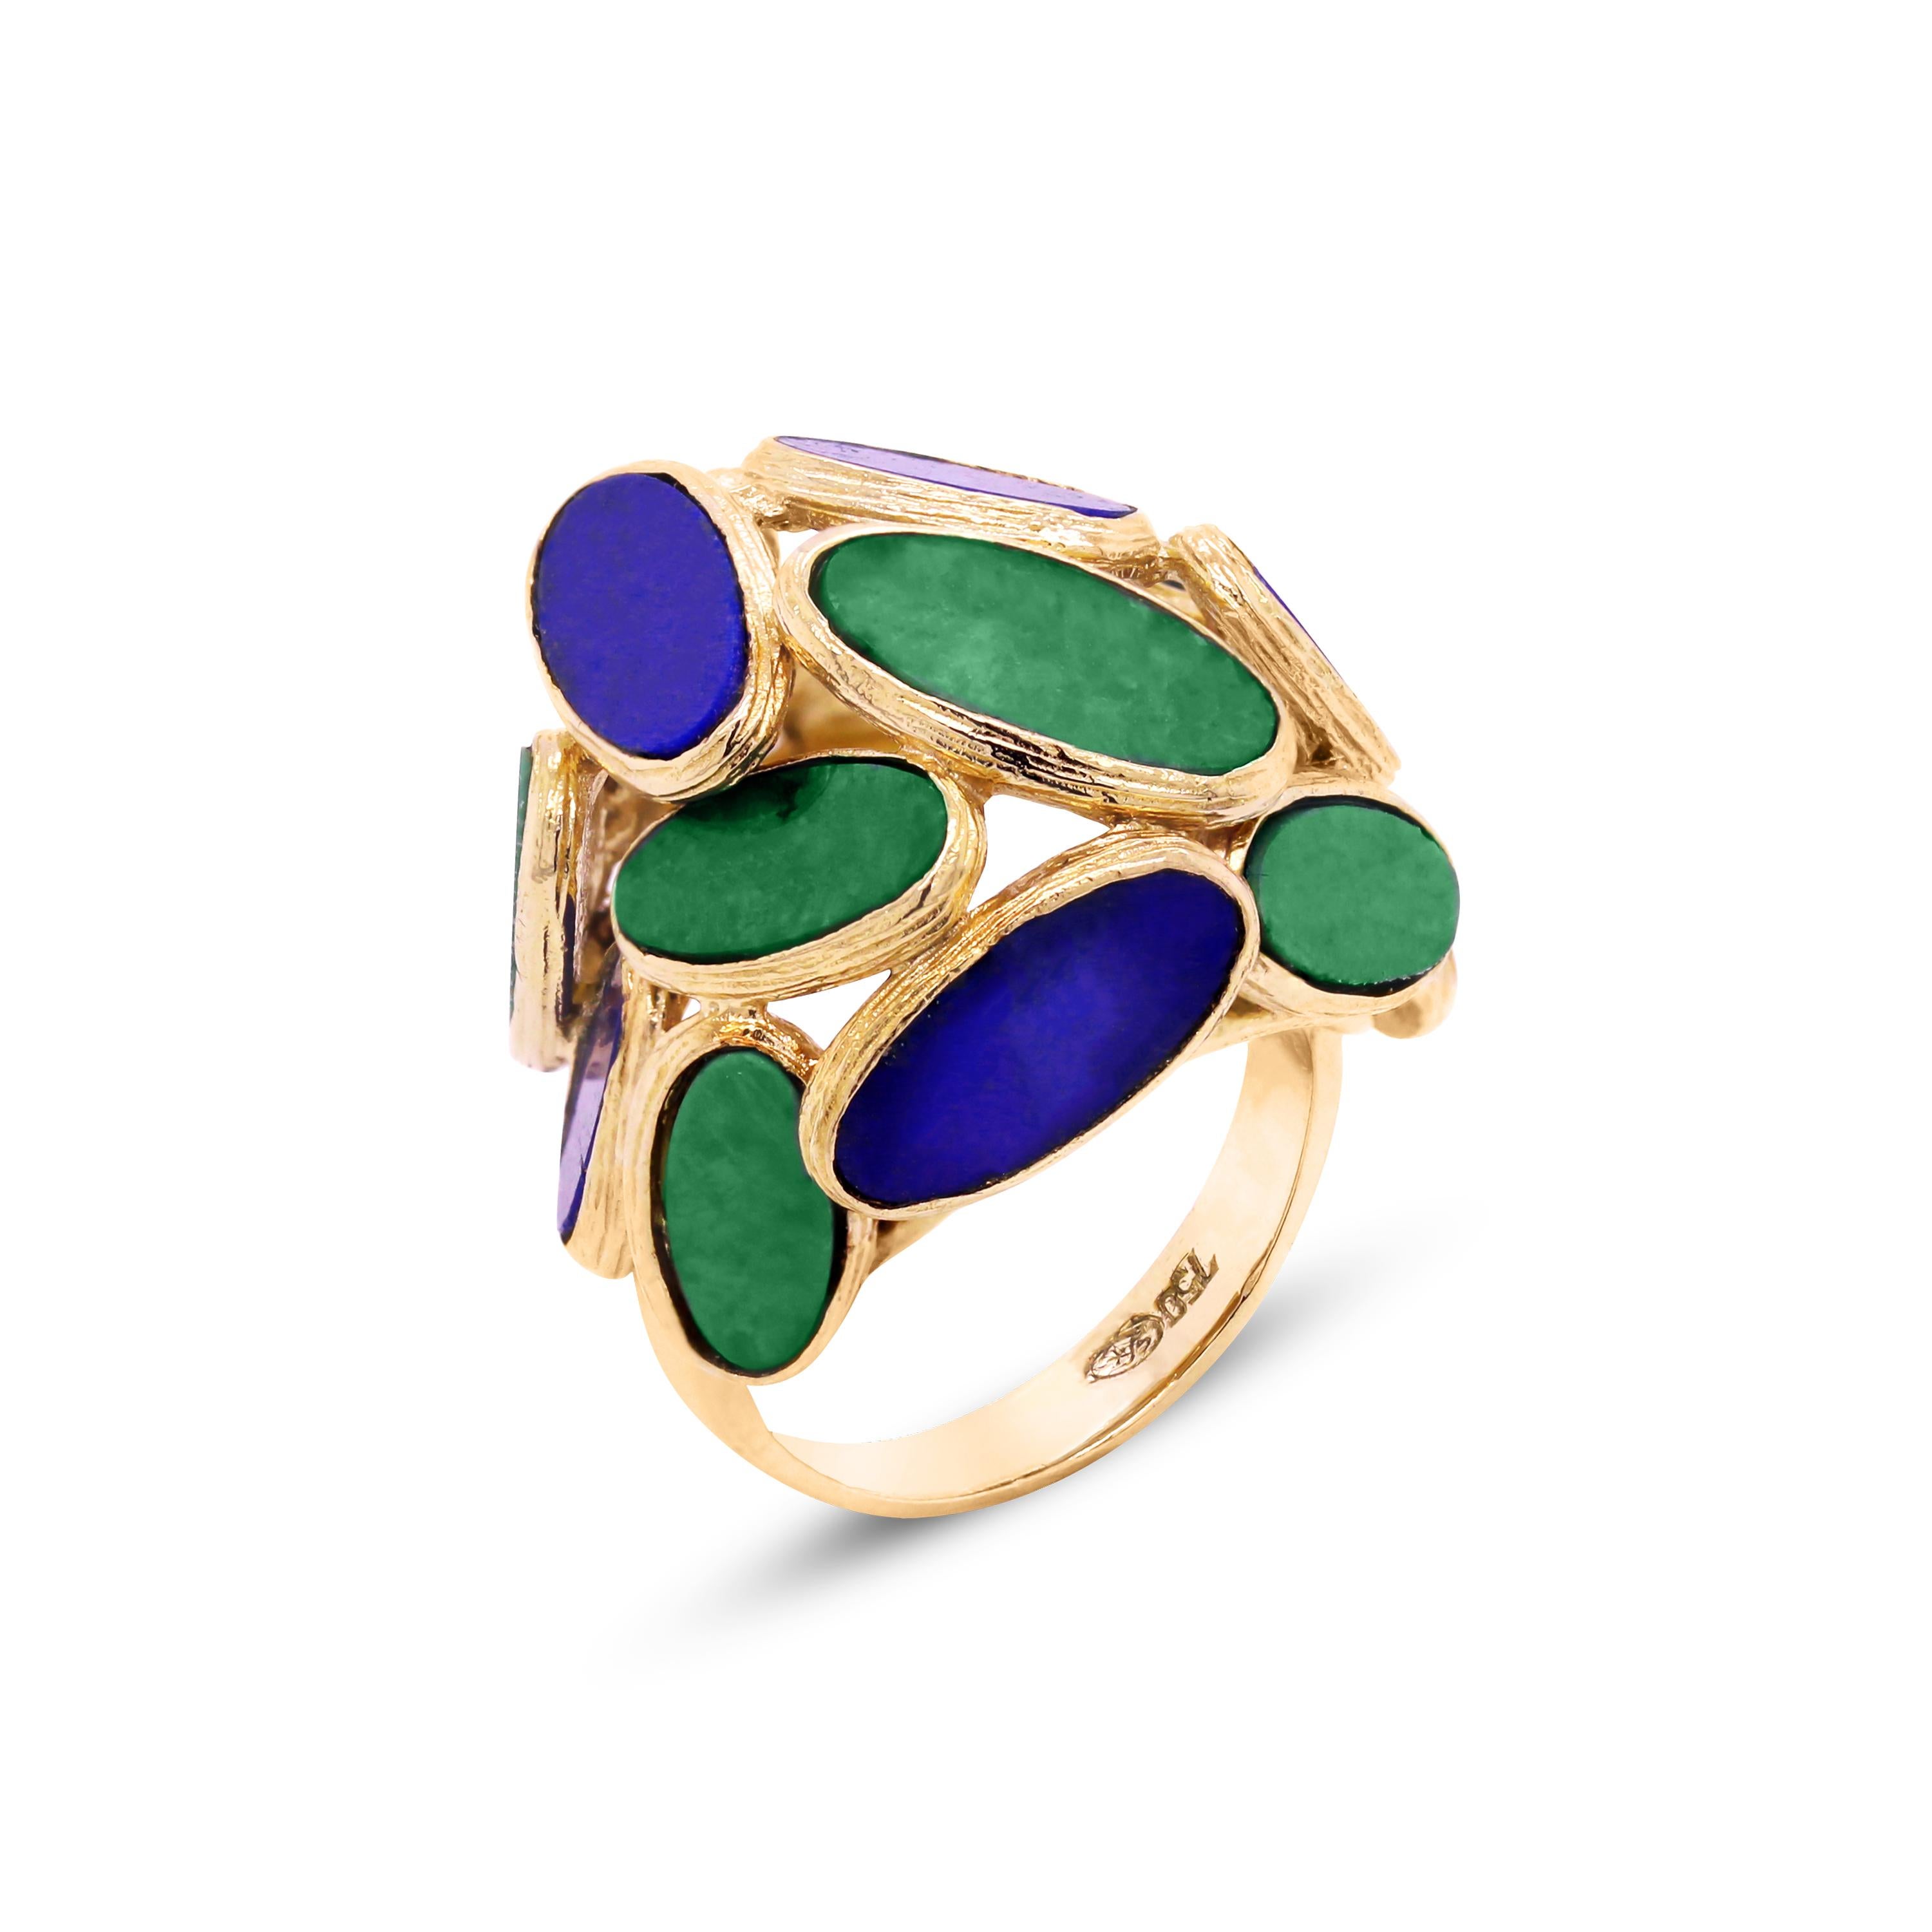 18K Yellow Gold Ring with Oval-Cut Jade and Lapis Lazuli

This fun and unique ring features Jade and Lapis in the centers

Truly beautiful color combination with the greens and blues. The Lapis Lazuli and Jades are very vibrant in color and make for